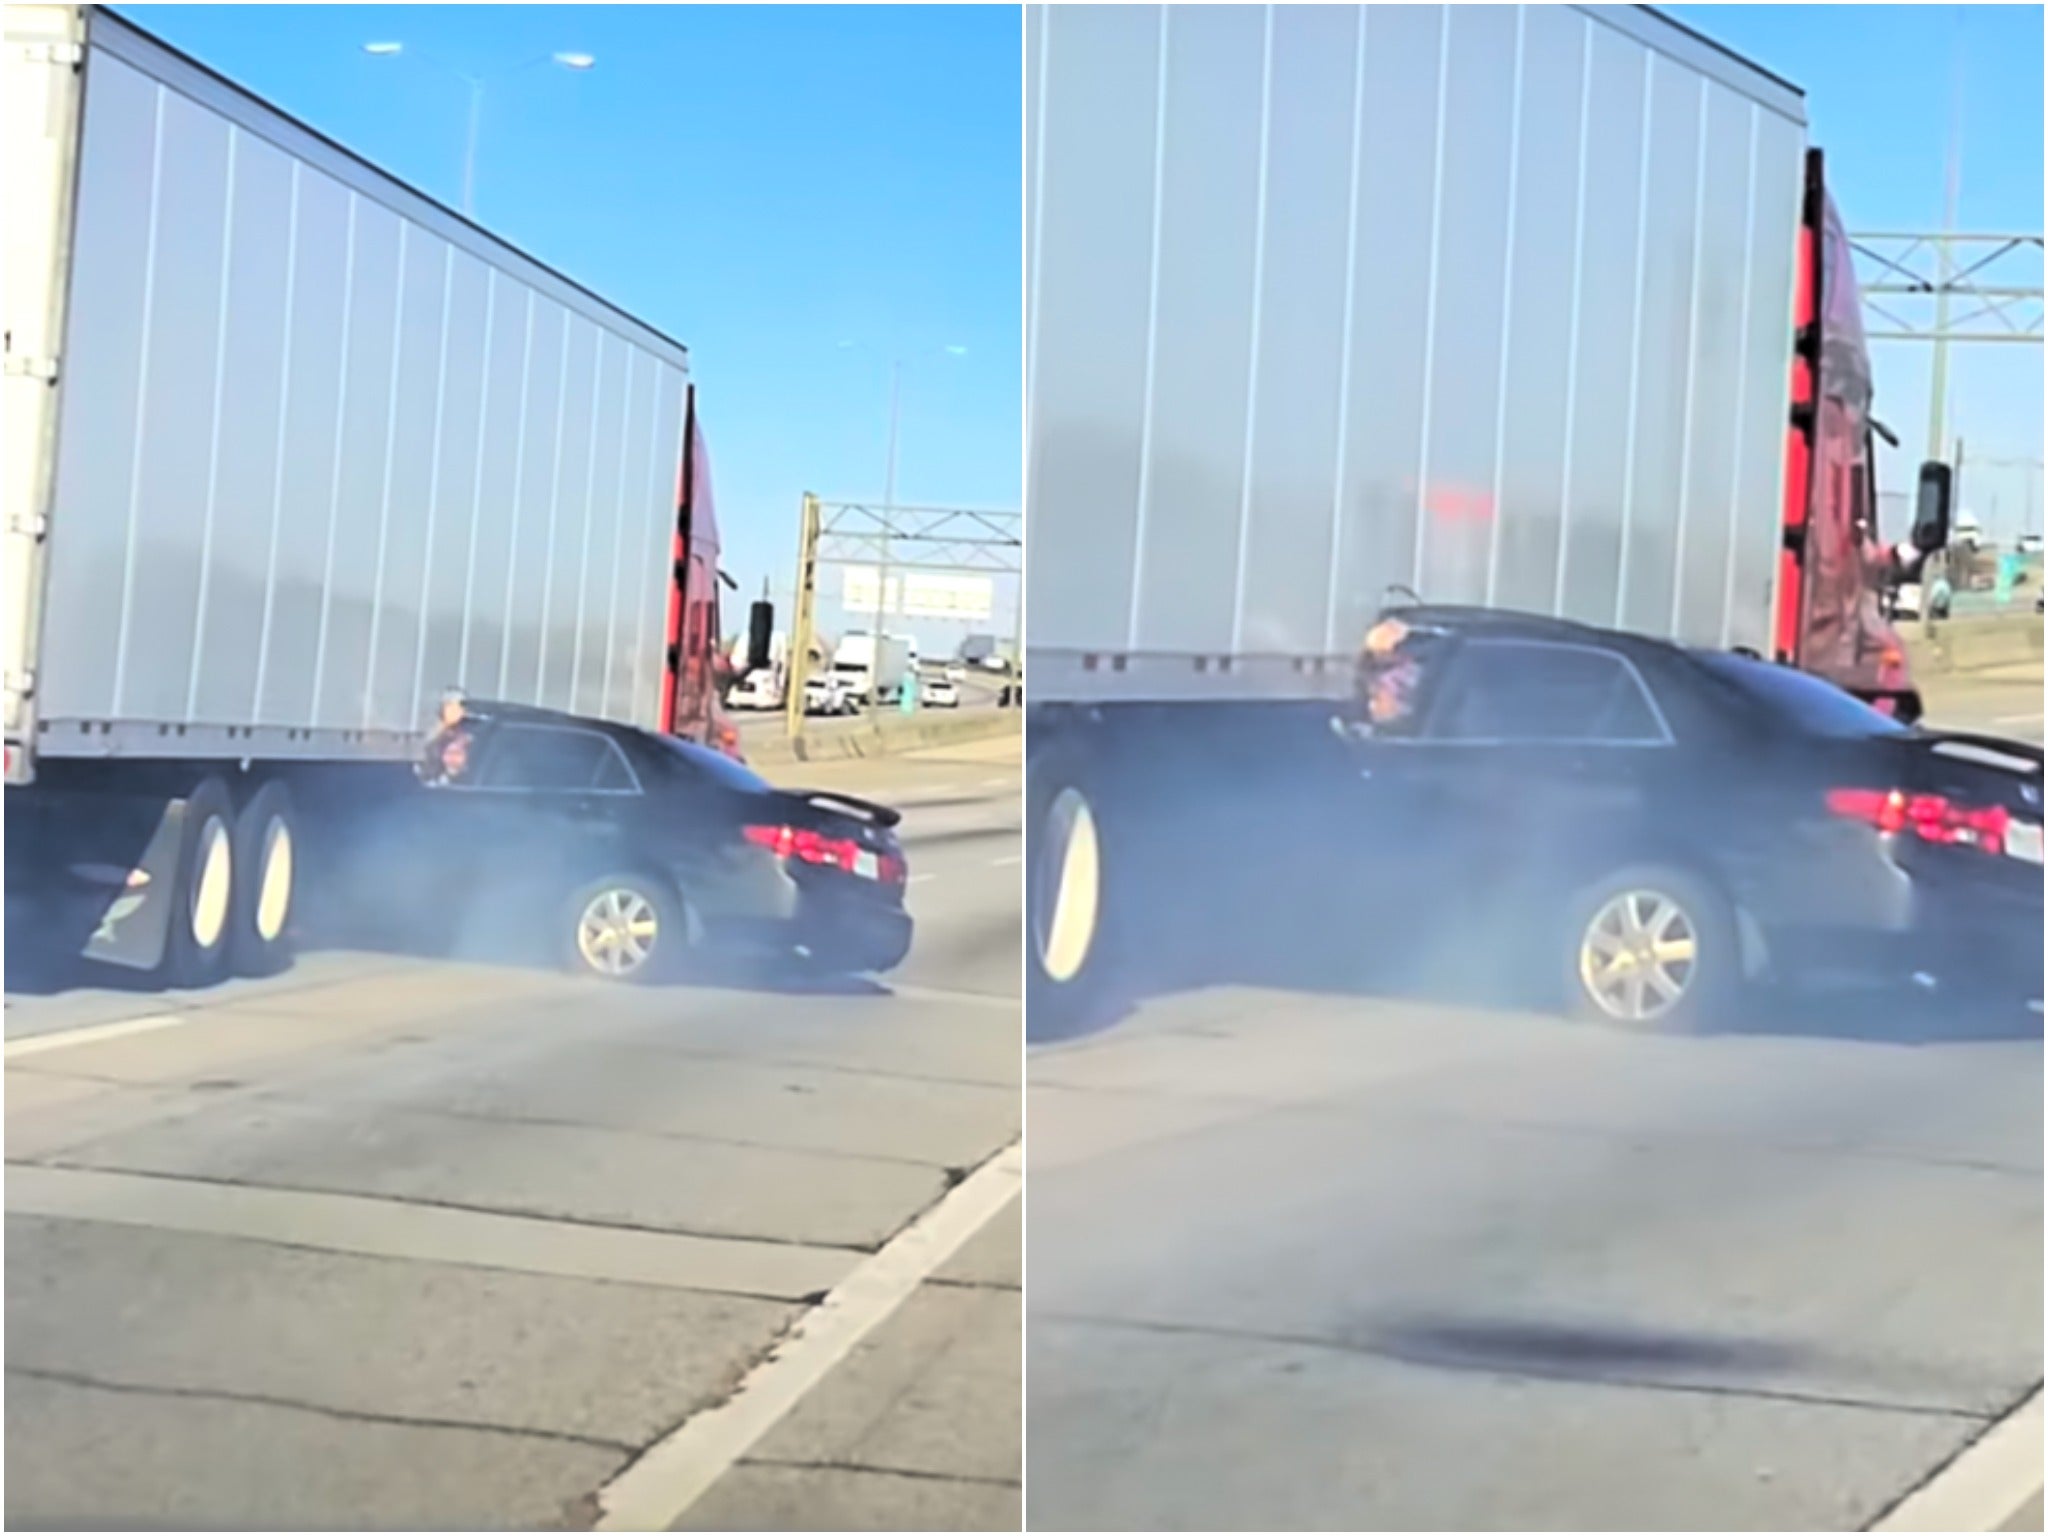 A driver waved for help while being dragged along the highway by a truck